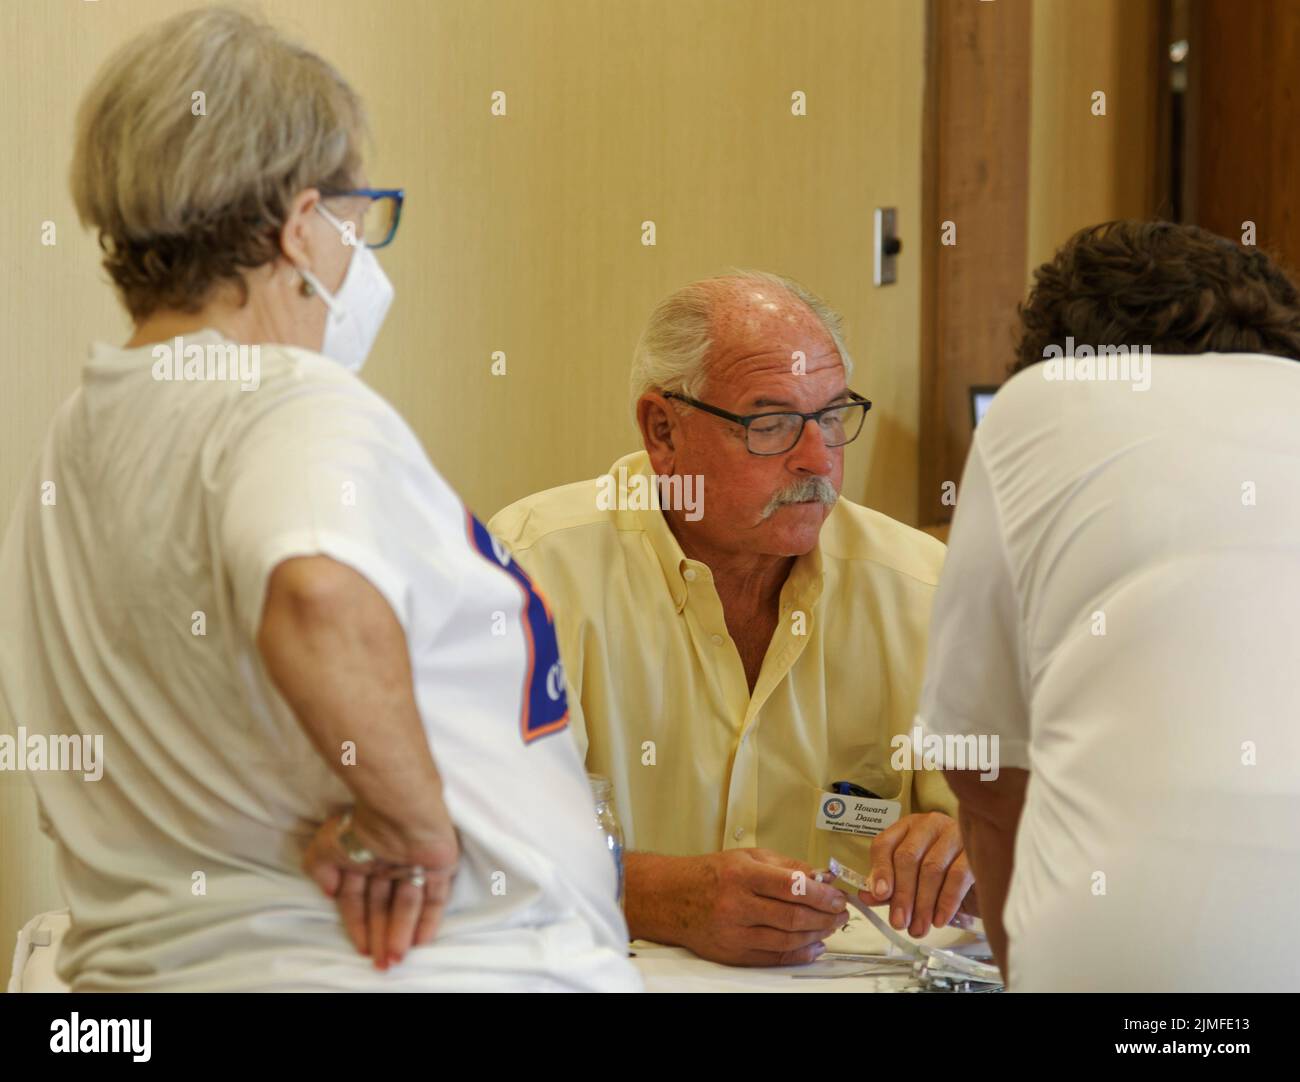 Calvert City, KY, USA. 05 Aug 2022. A masked attendee watches as Marshall County Democratic Party Executive Committee member Howard Dawes (center) checks in another attendee at the 25th Mike Miller Memorial Marshall County Bean Dinner at Kentucky Dam Village State Resort Park. A spokeswoman said 167 guests preregistered for the event and organizers expected approximately 200 people to attend. (Credit: Billy Suratt/Apex MediaWire via Alamy Live News) Stock Photo